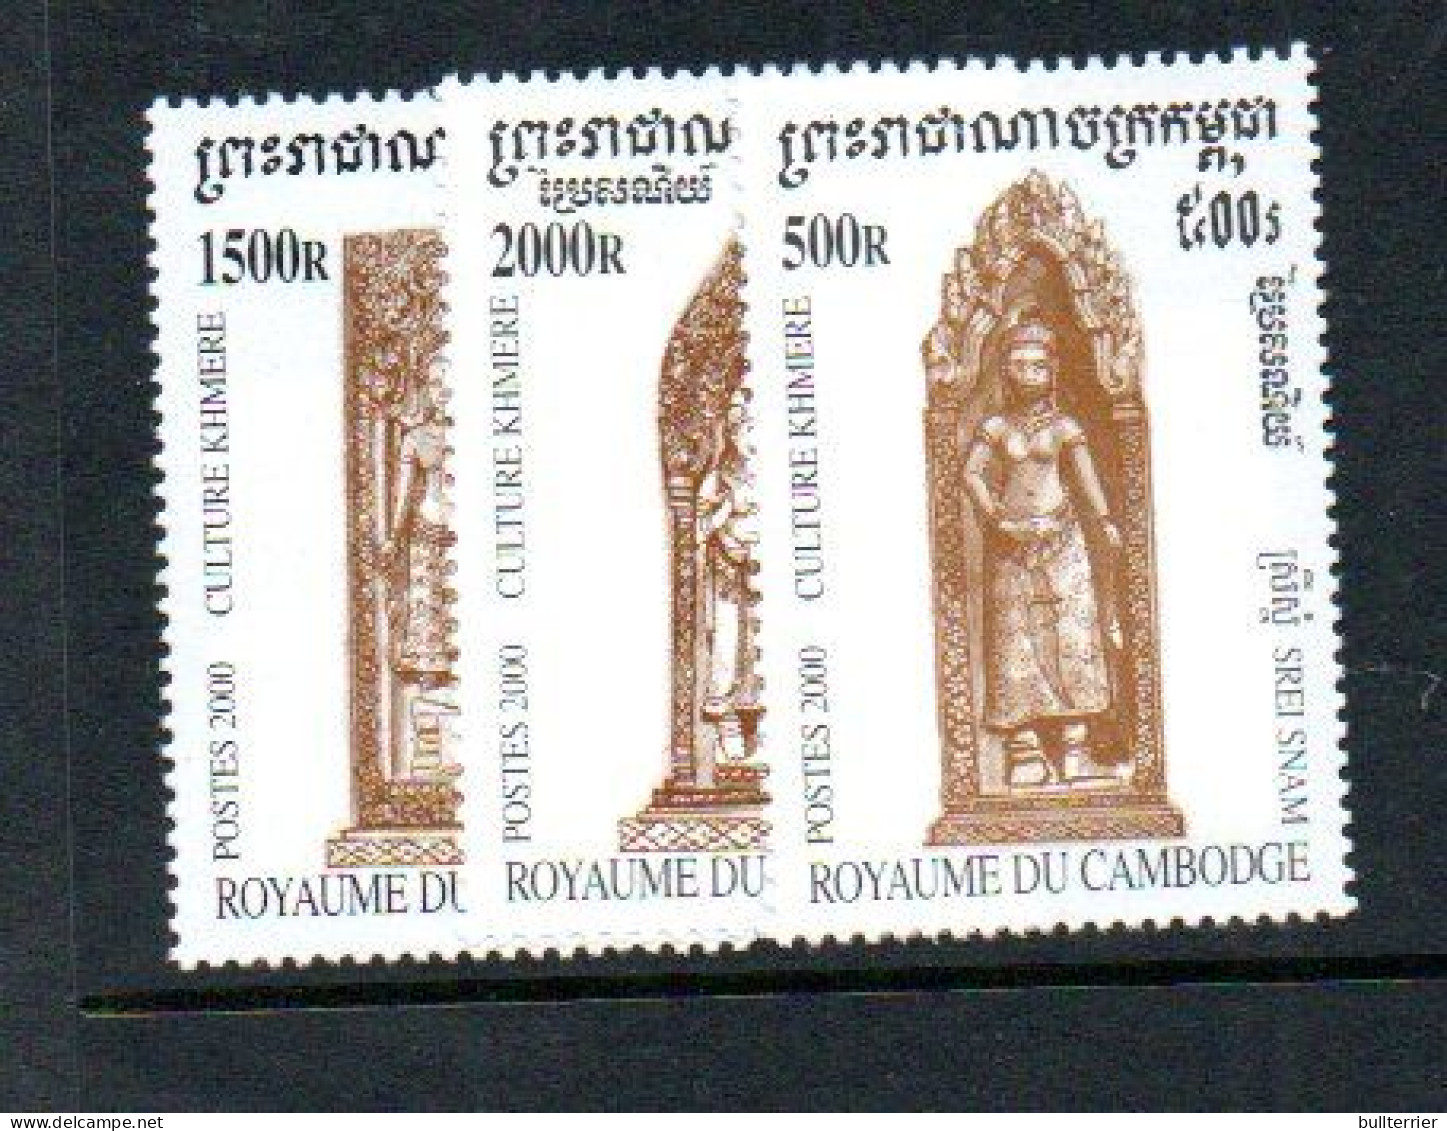 CAMBODIA - 2000  - KHMERE CULTURE ET OF 3  MINT NEVER HINGED - Cambodge